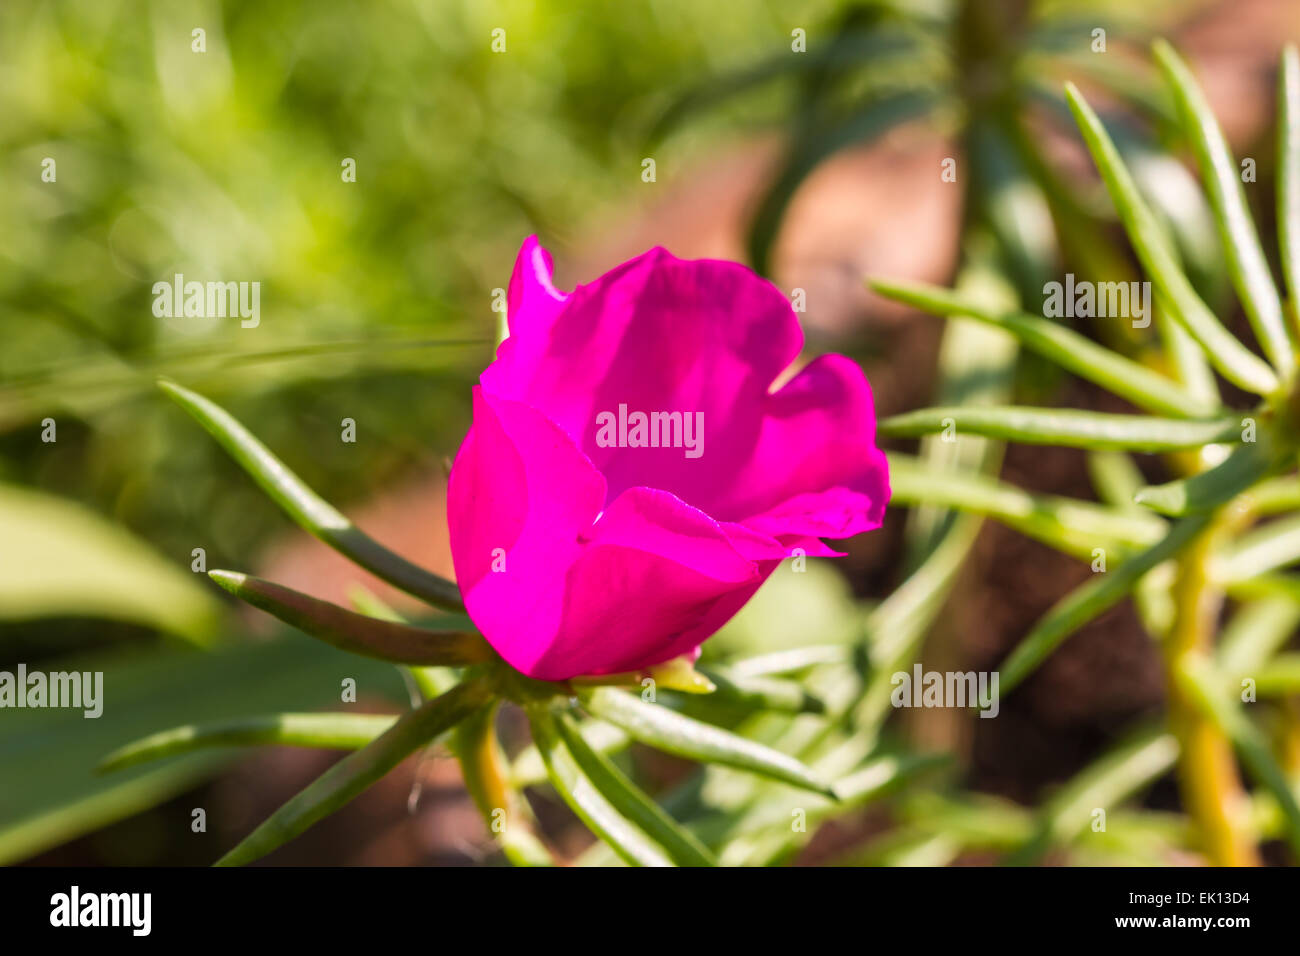 Portulaca flowers at the garden in morning Stock Photo